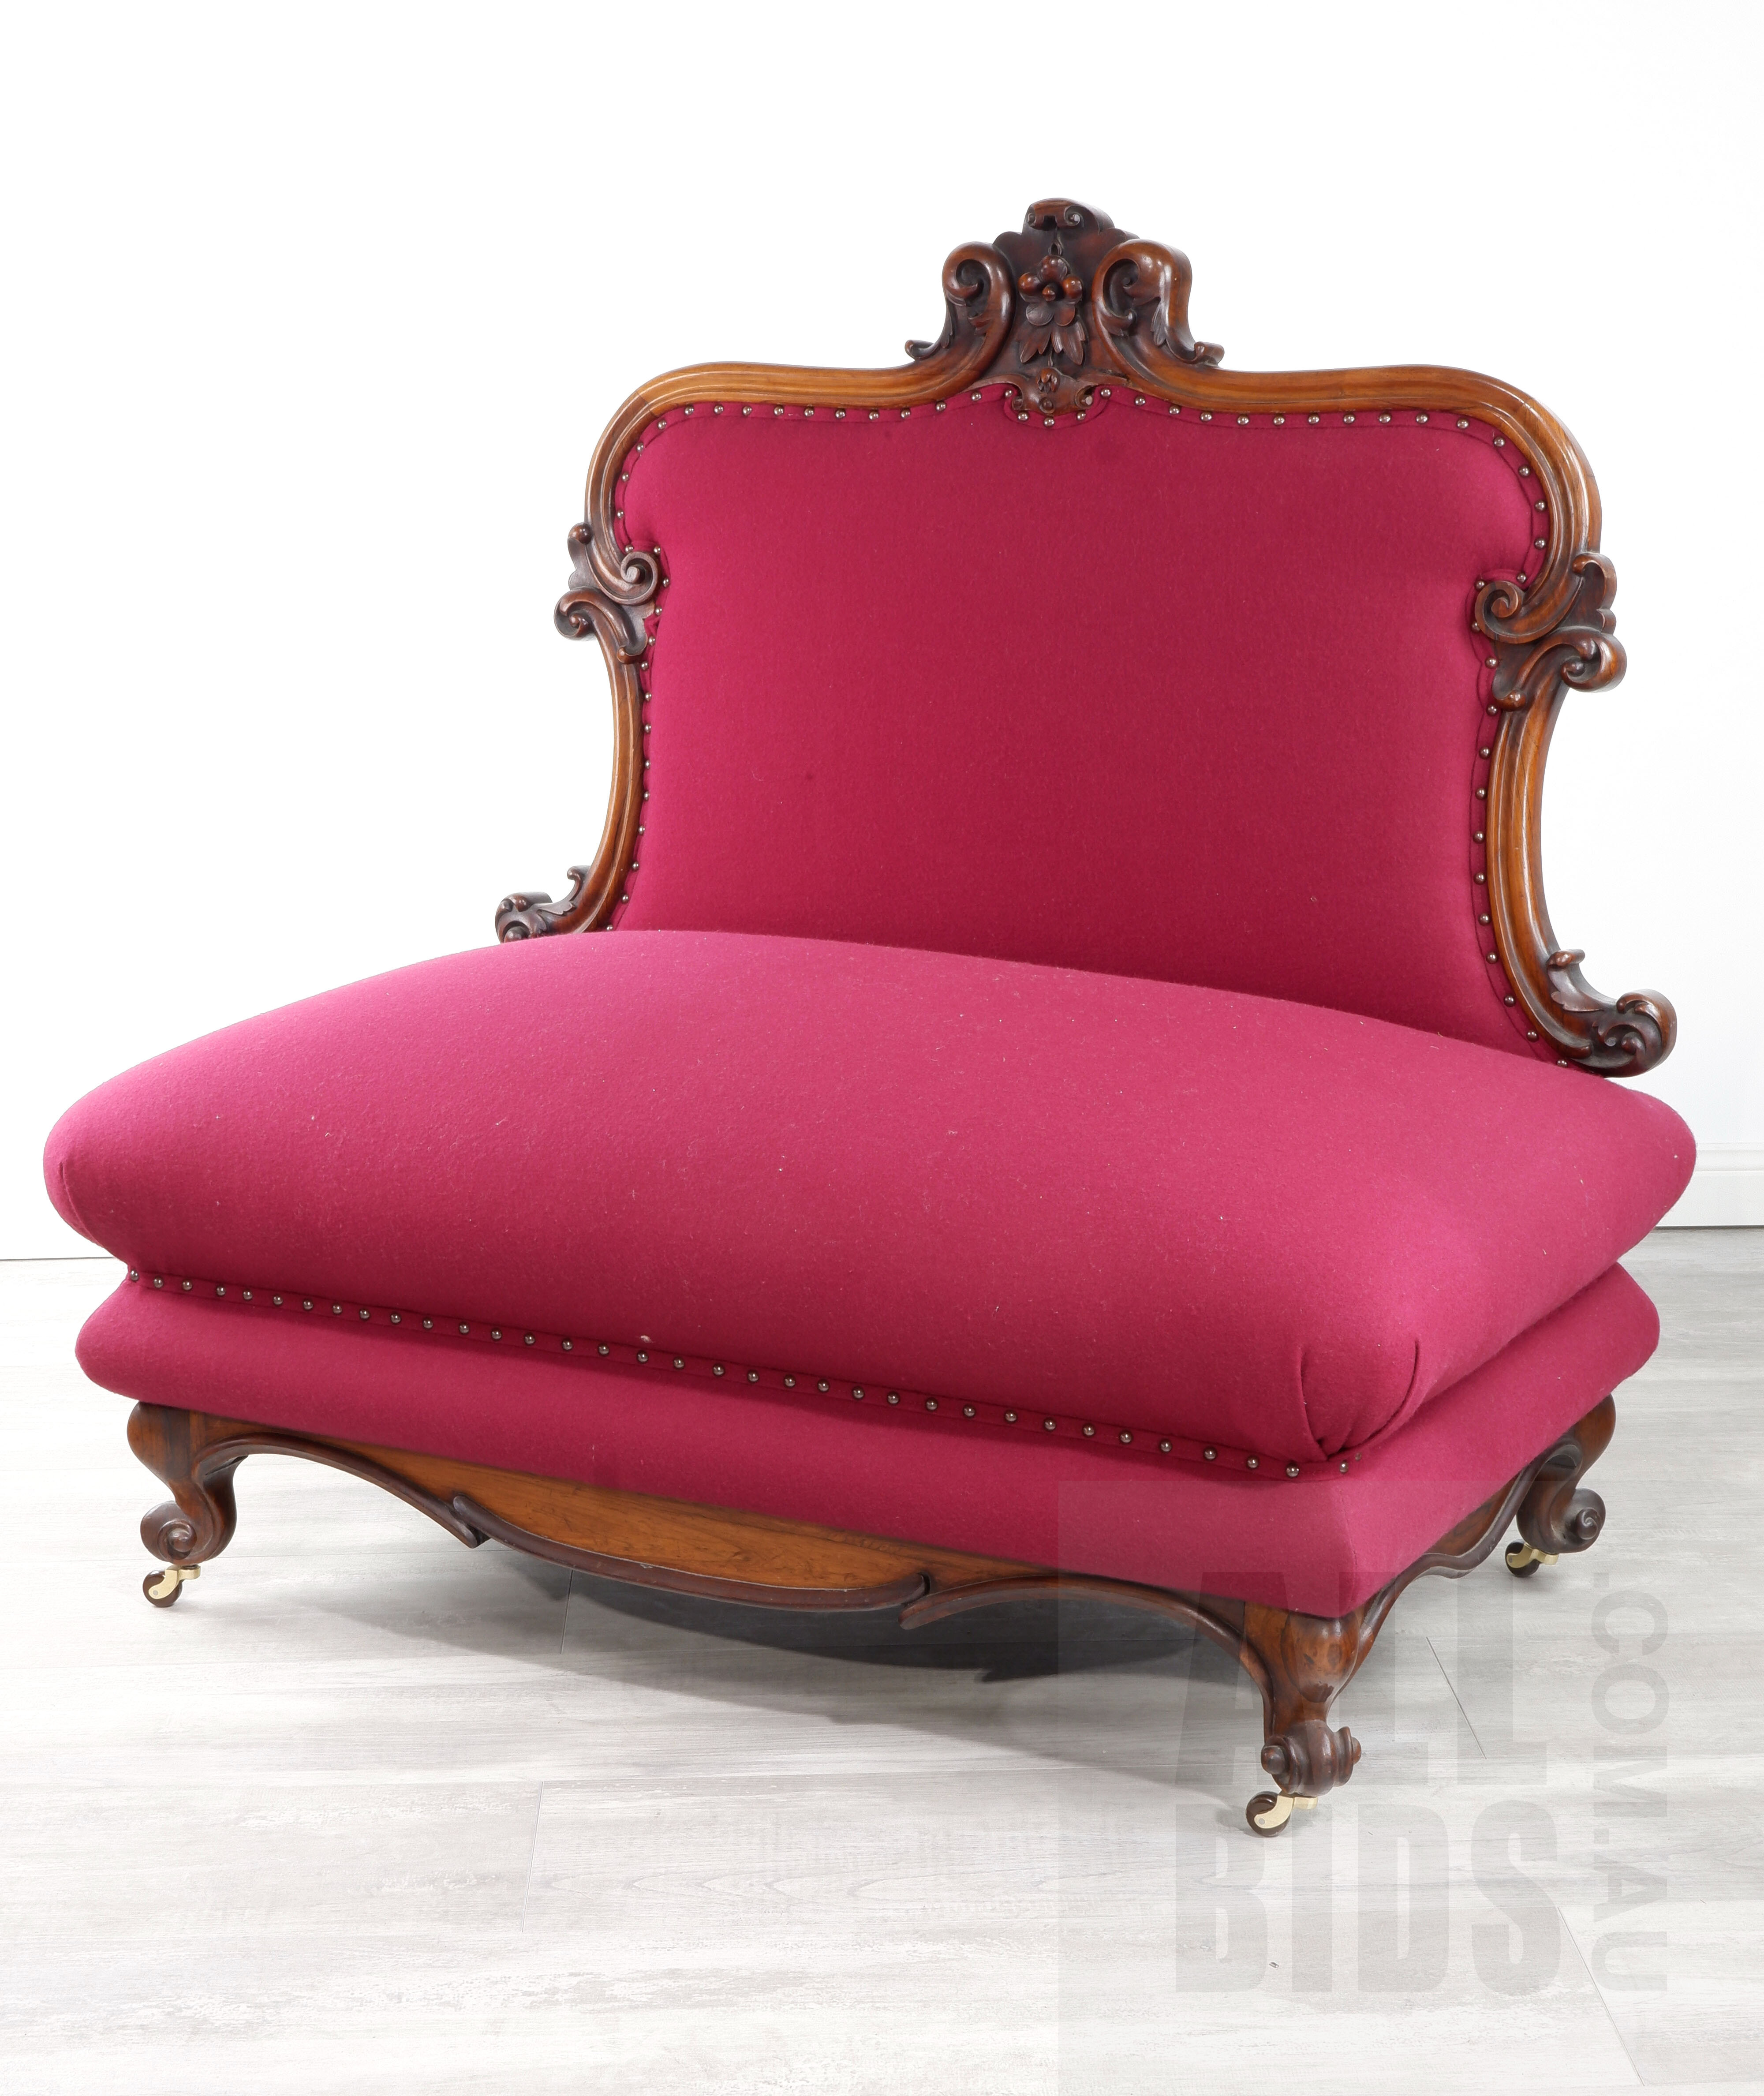 'Good Victorian Mahogany Lounge with Vibrant Crimson Fabric Upholstery, Circa 1880, Second of Two'